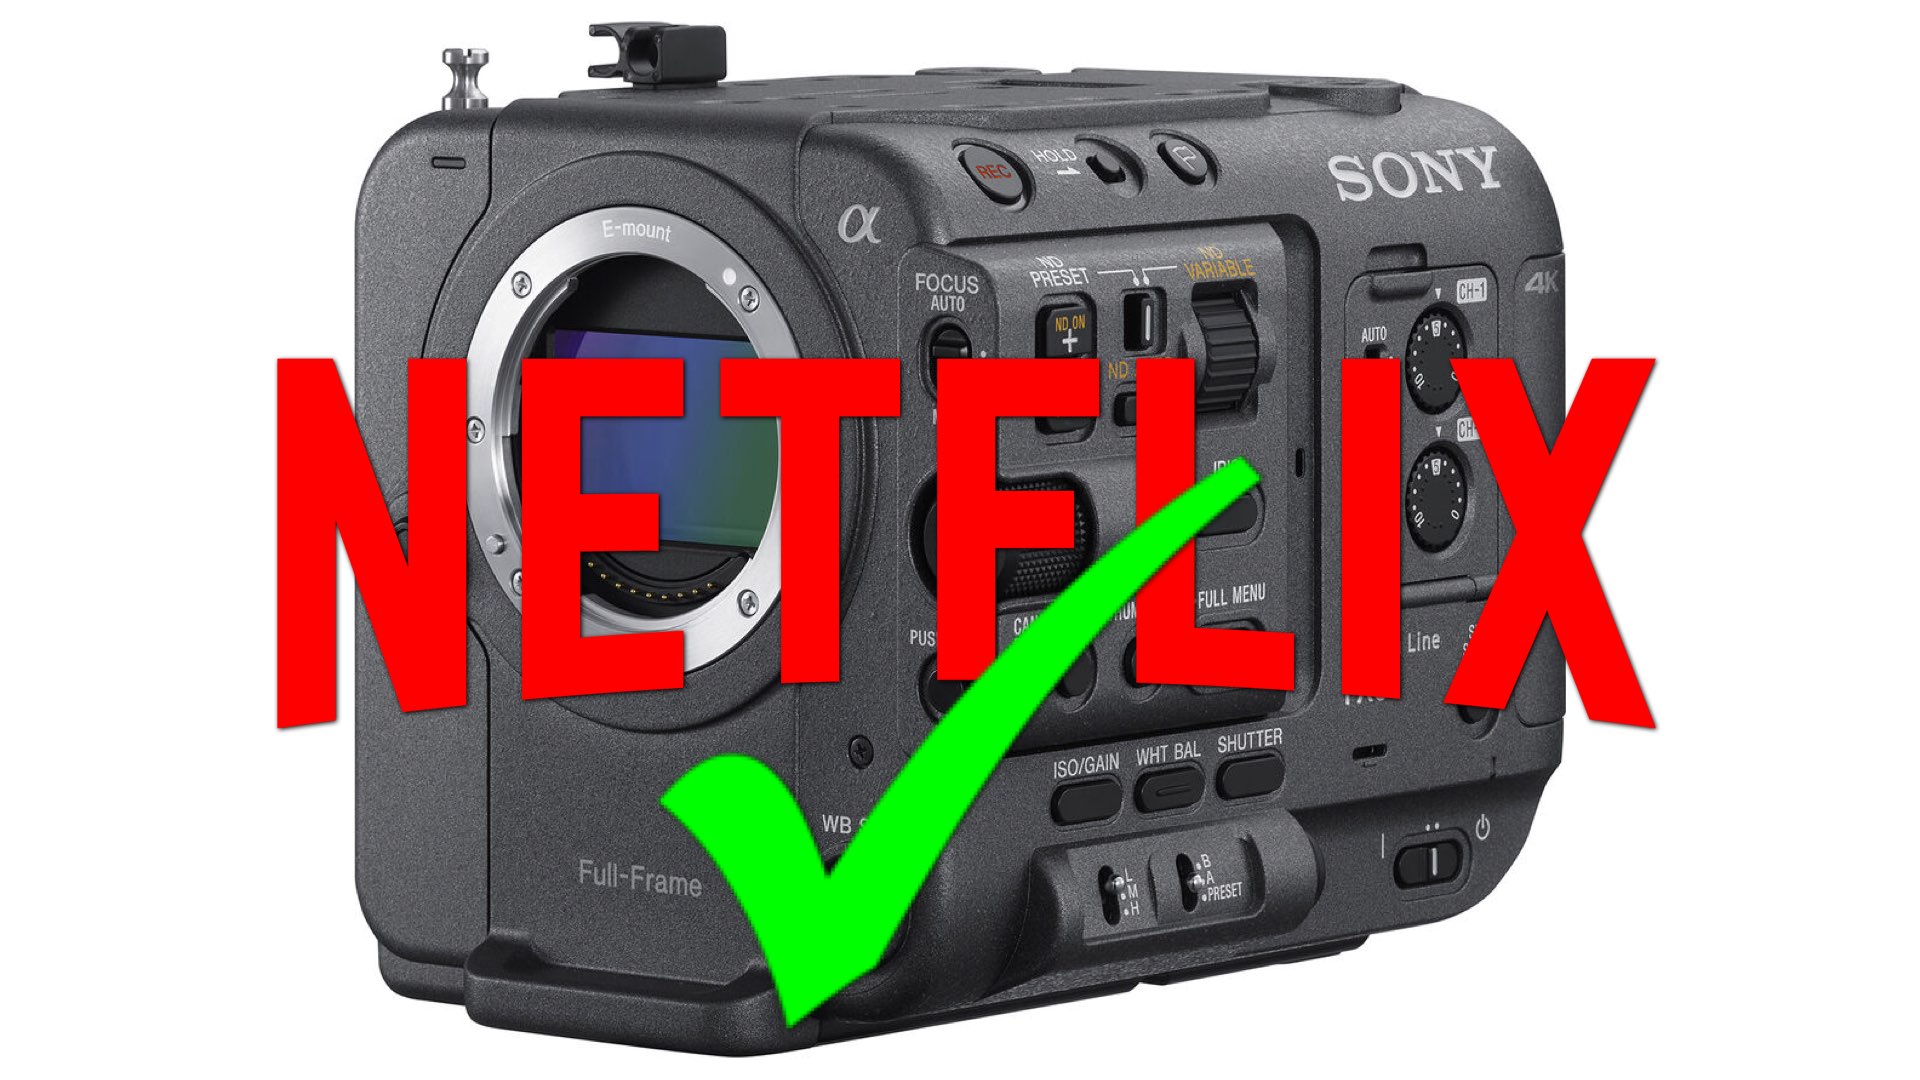 Sony FX6 Gets Netflix Approval